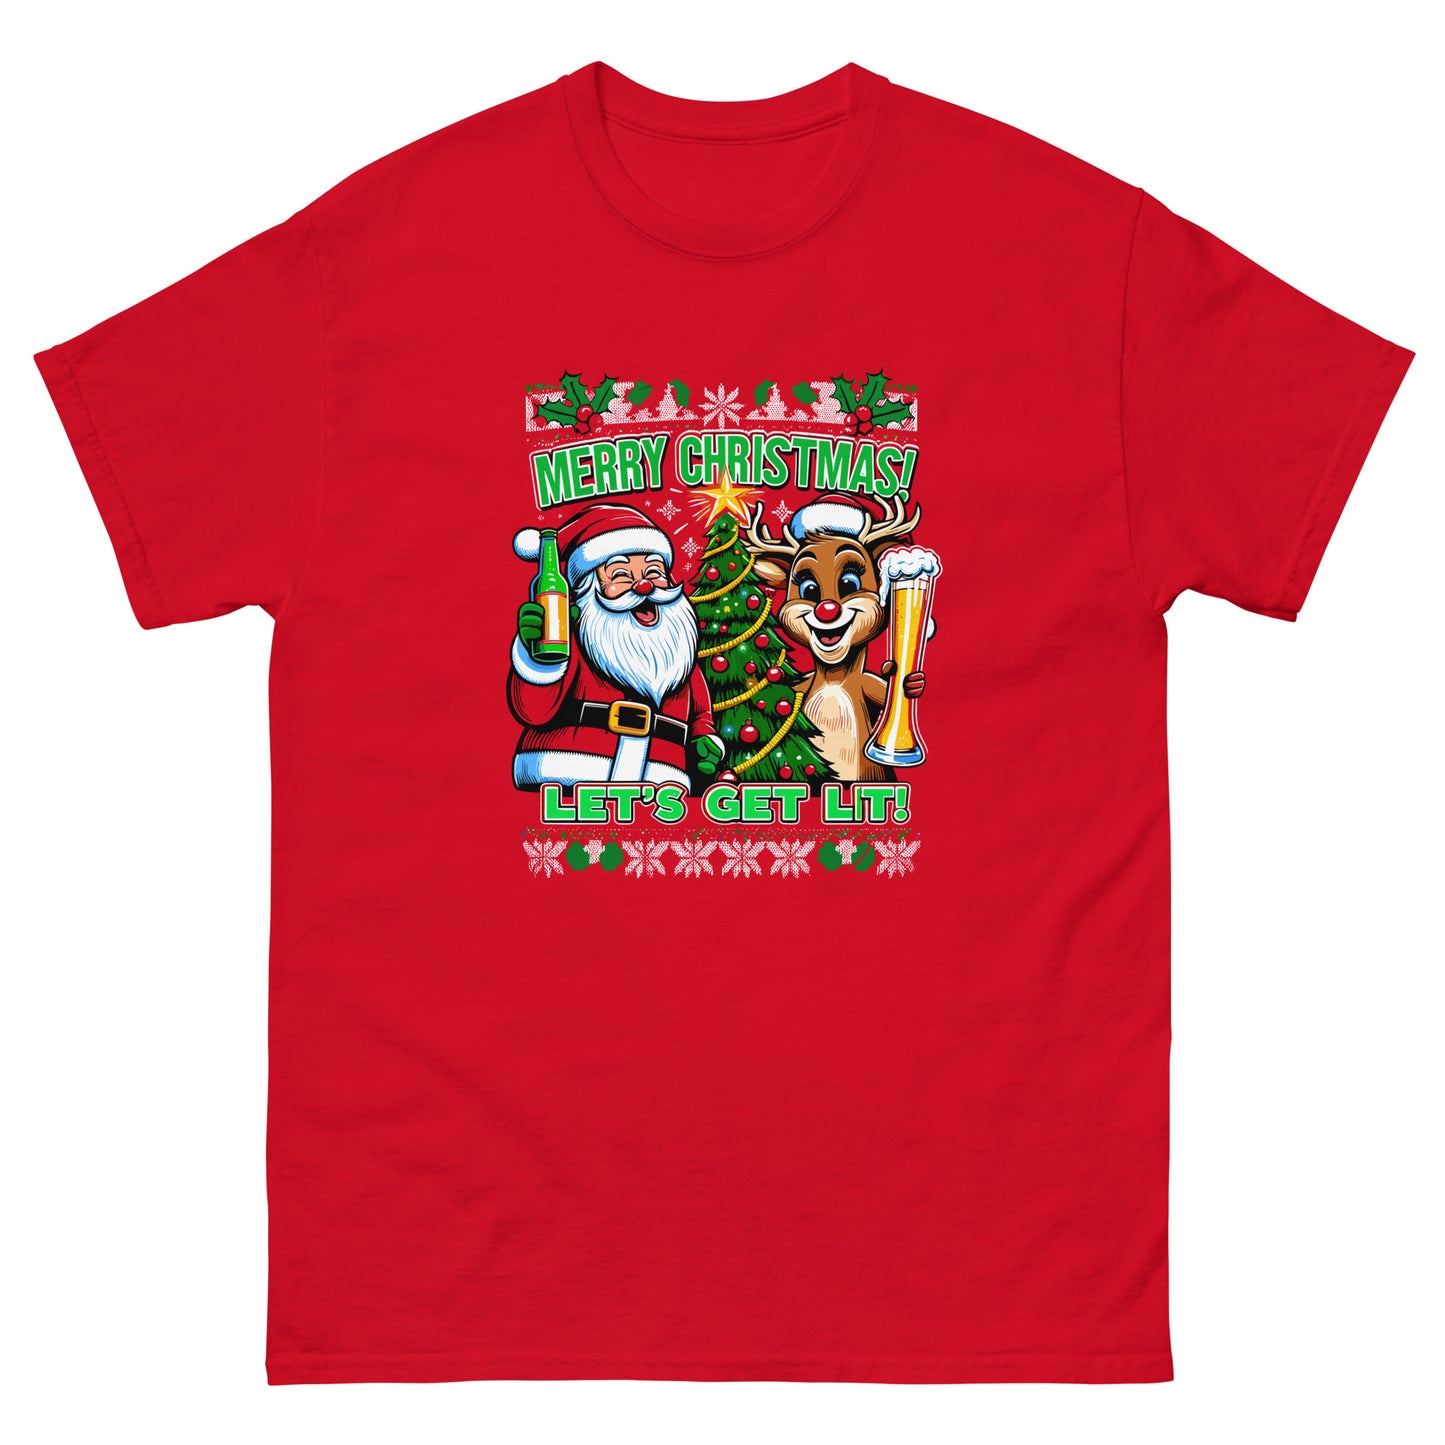 Merry Christmas lets get lit with santa and rudolf printed ugly christmas t-shirt by Whistler Shirts